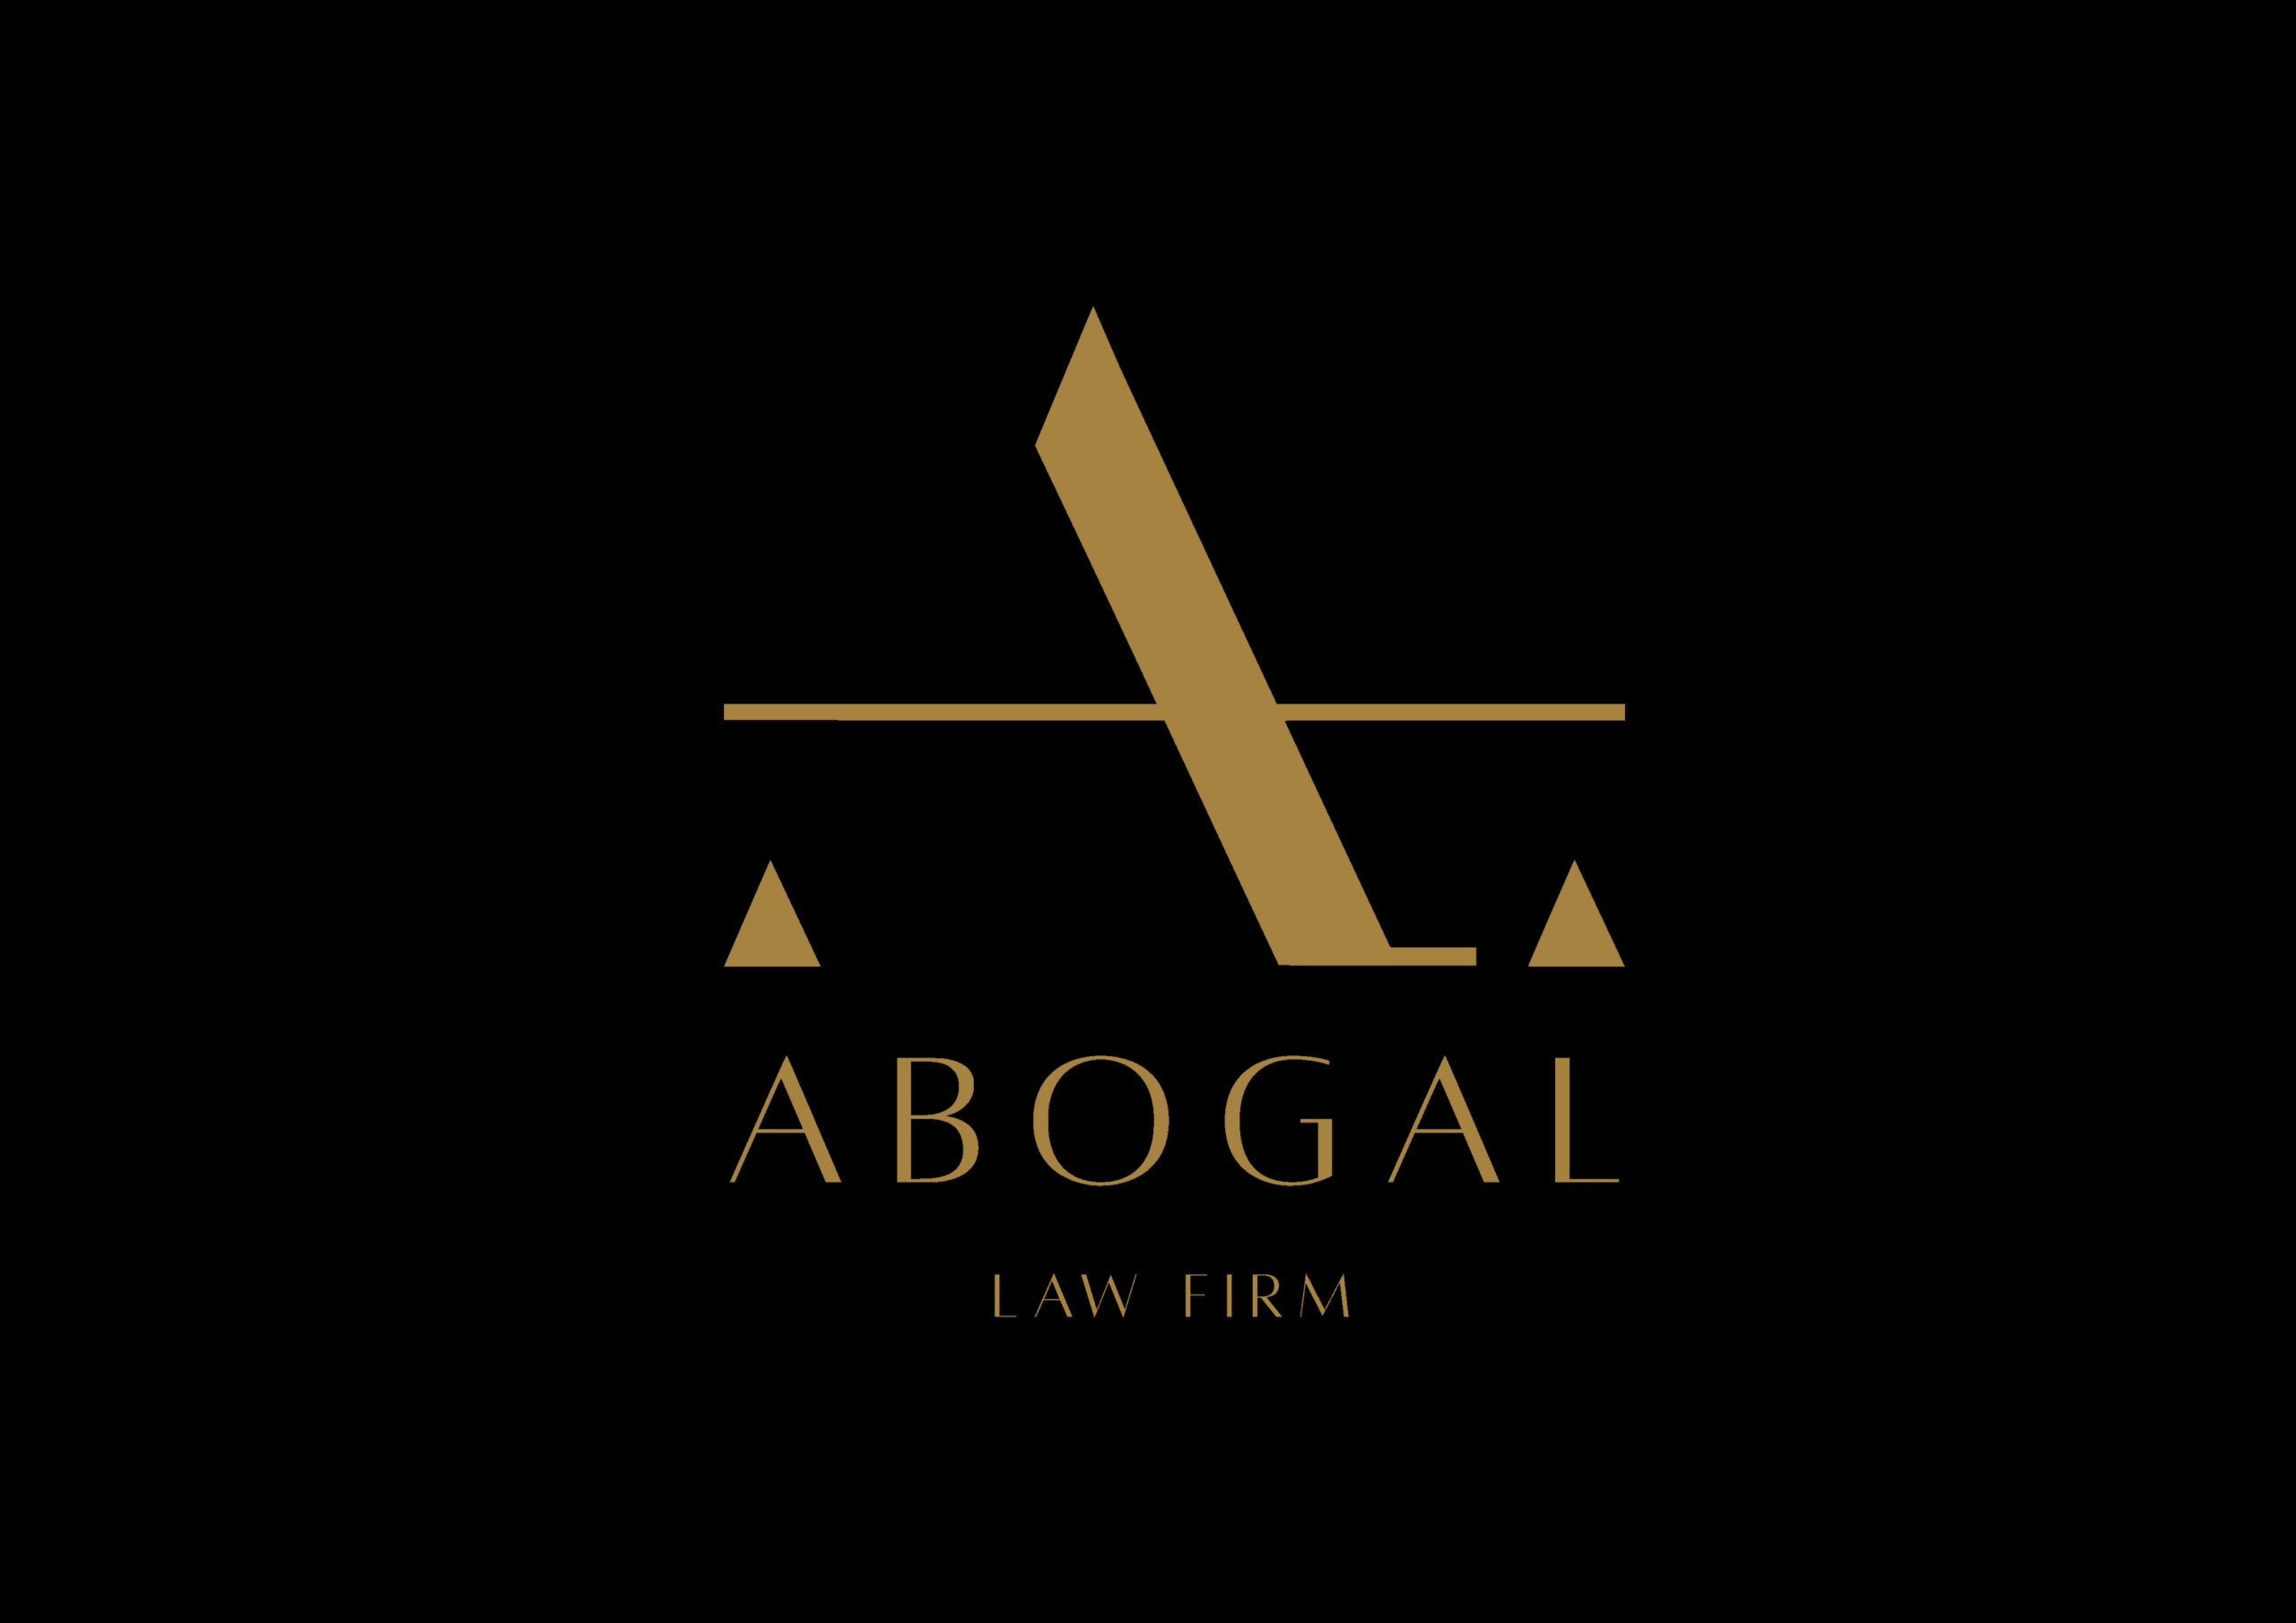 ABOGAL LAW FIRM